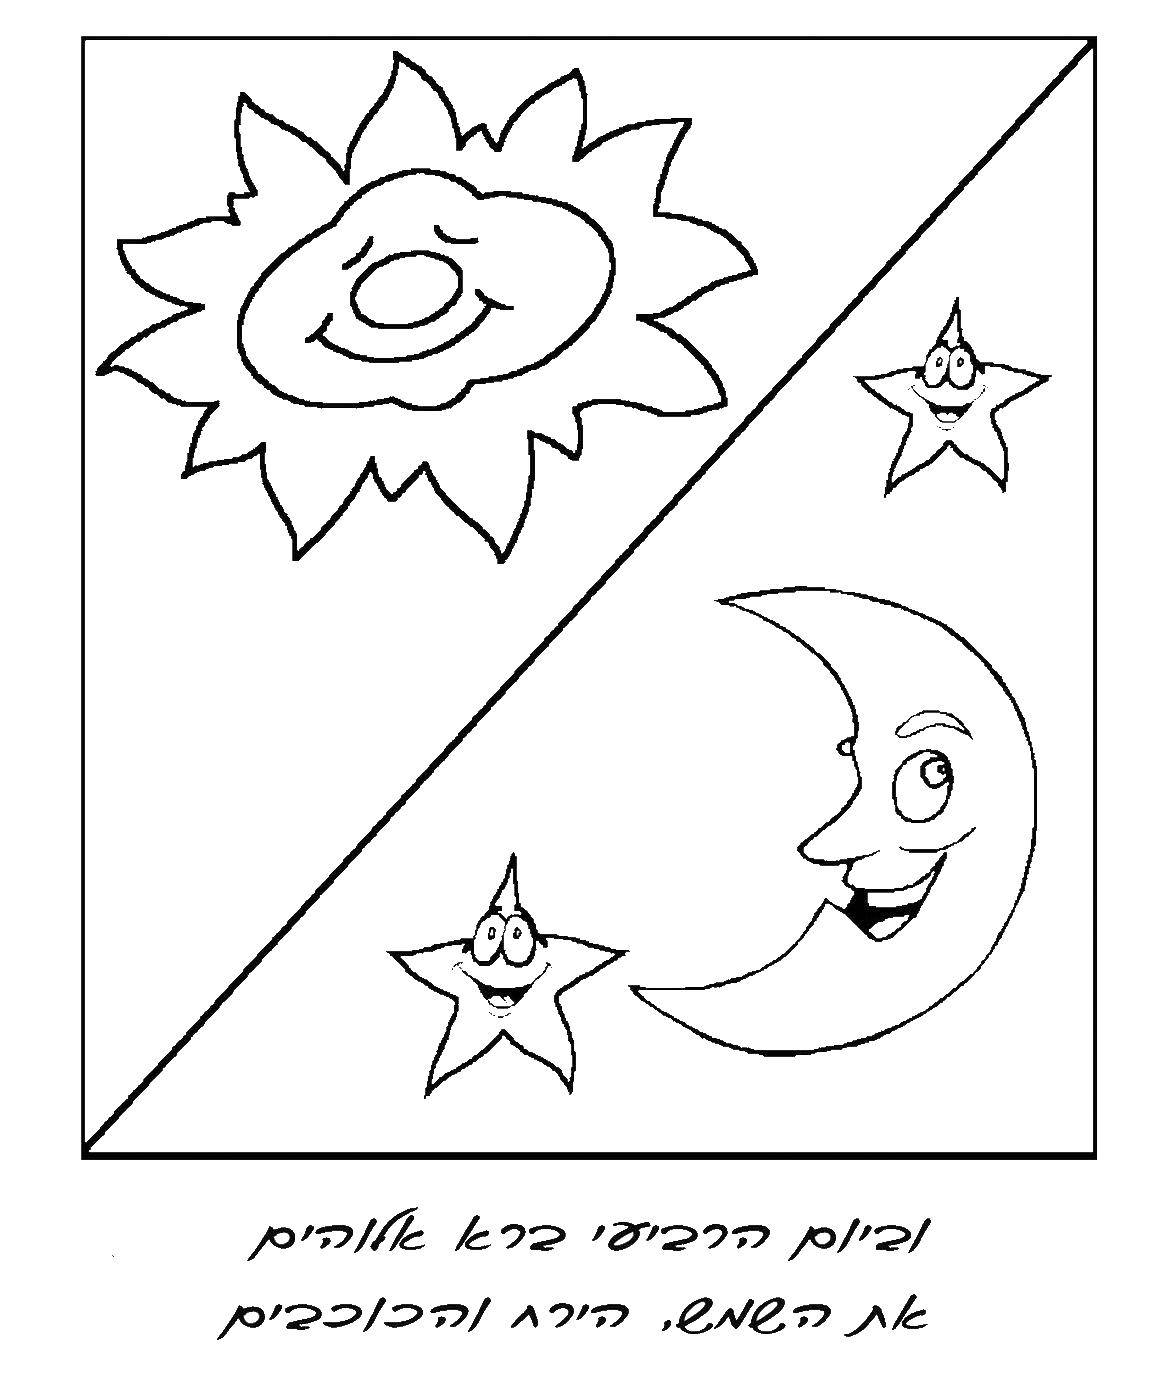 Coloring The moon and the sun. Category moon. Tags:  the moon, the stars, the sun.